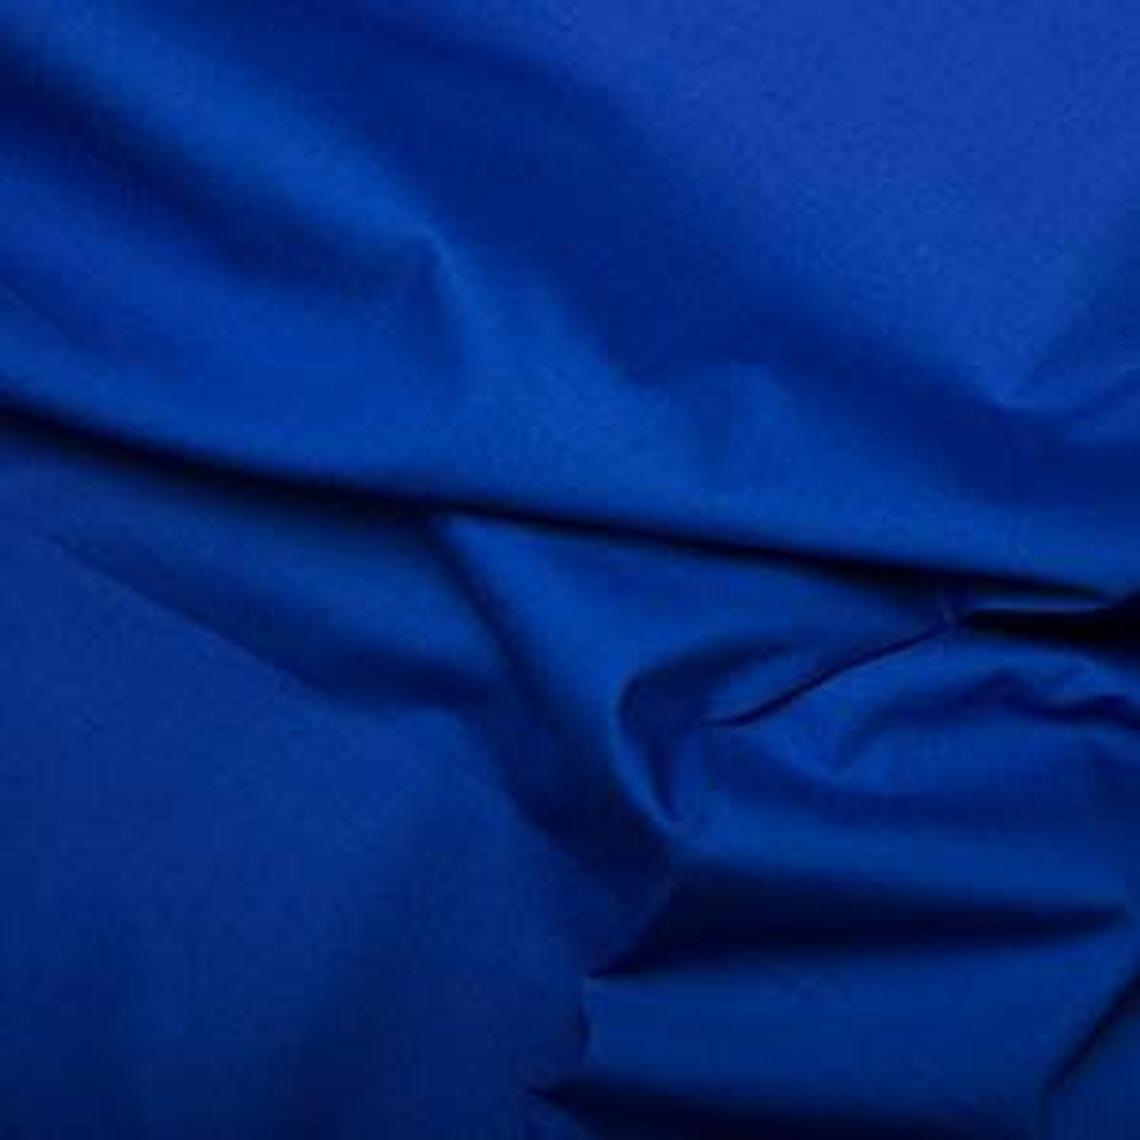 Excellent Quality Plain Royal Blue 100% Cotton Poplin Fabric 121gsm Sewing Quilting Craft Home Decor